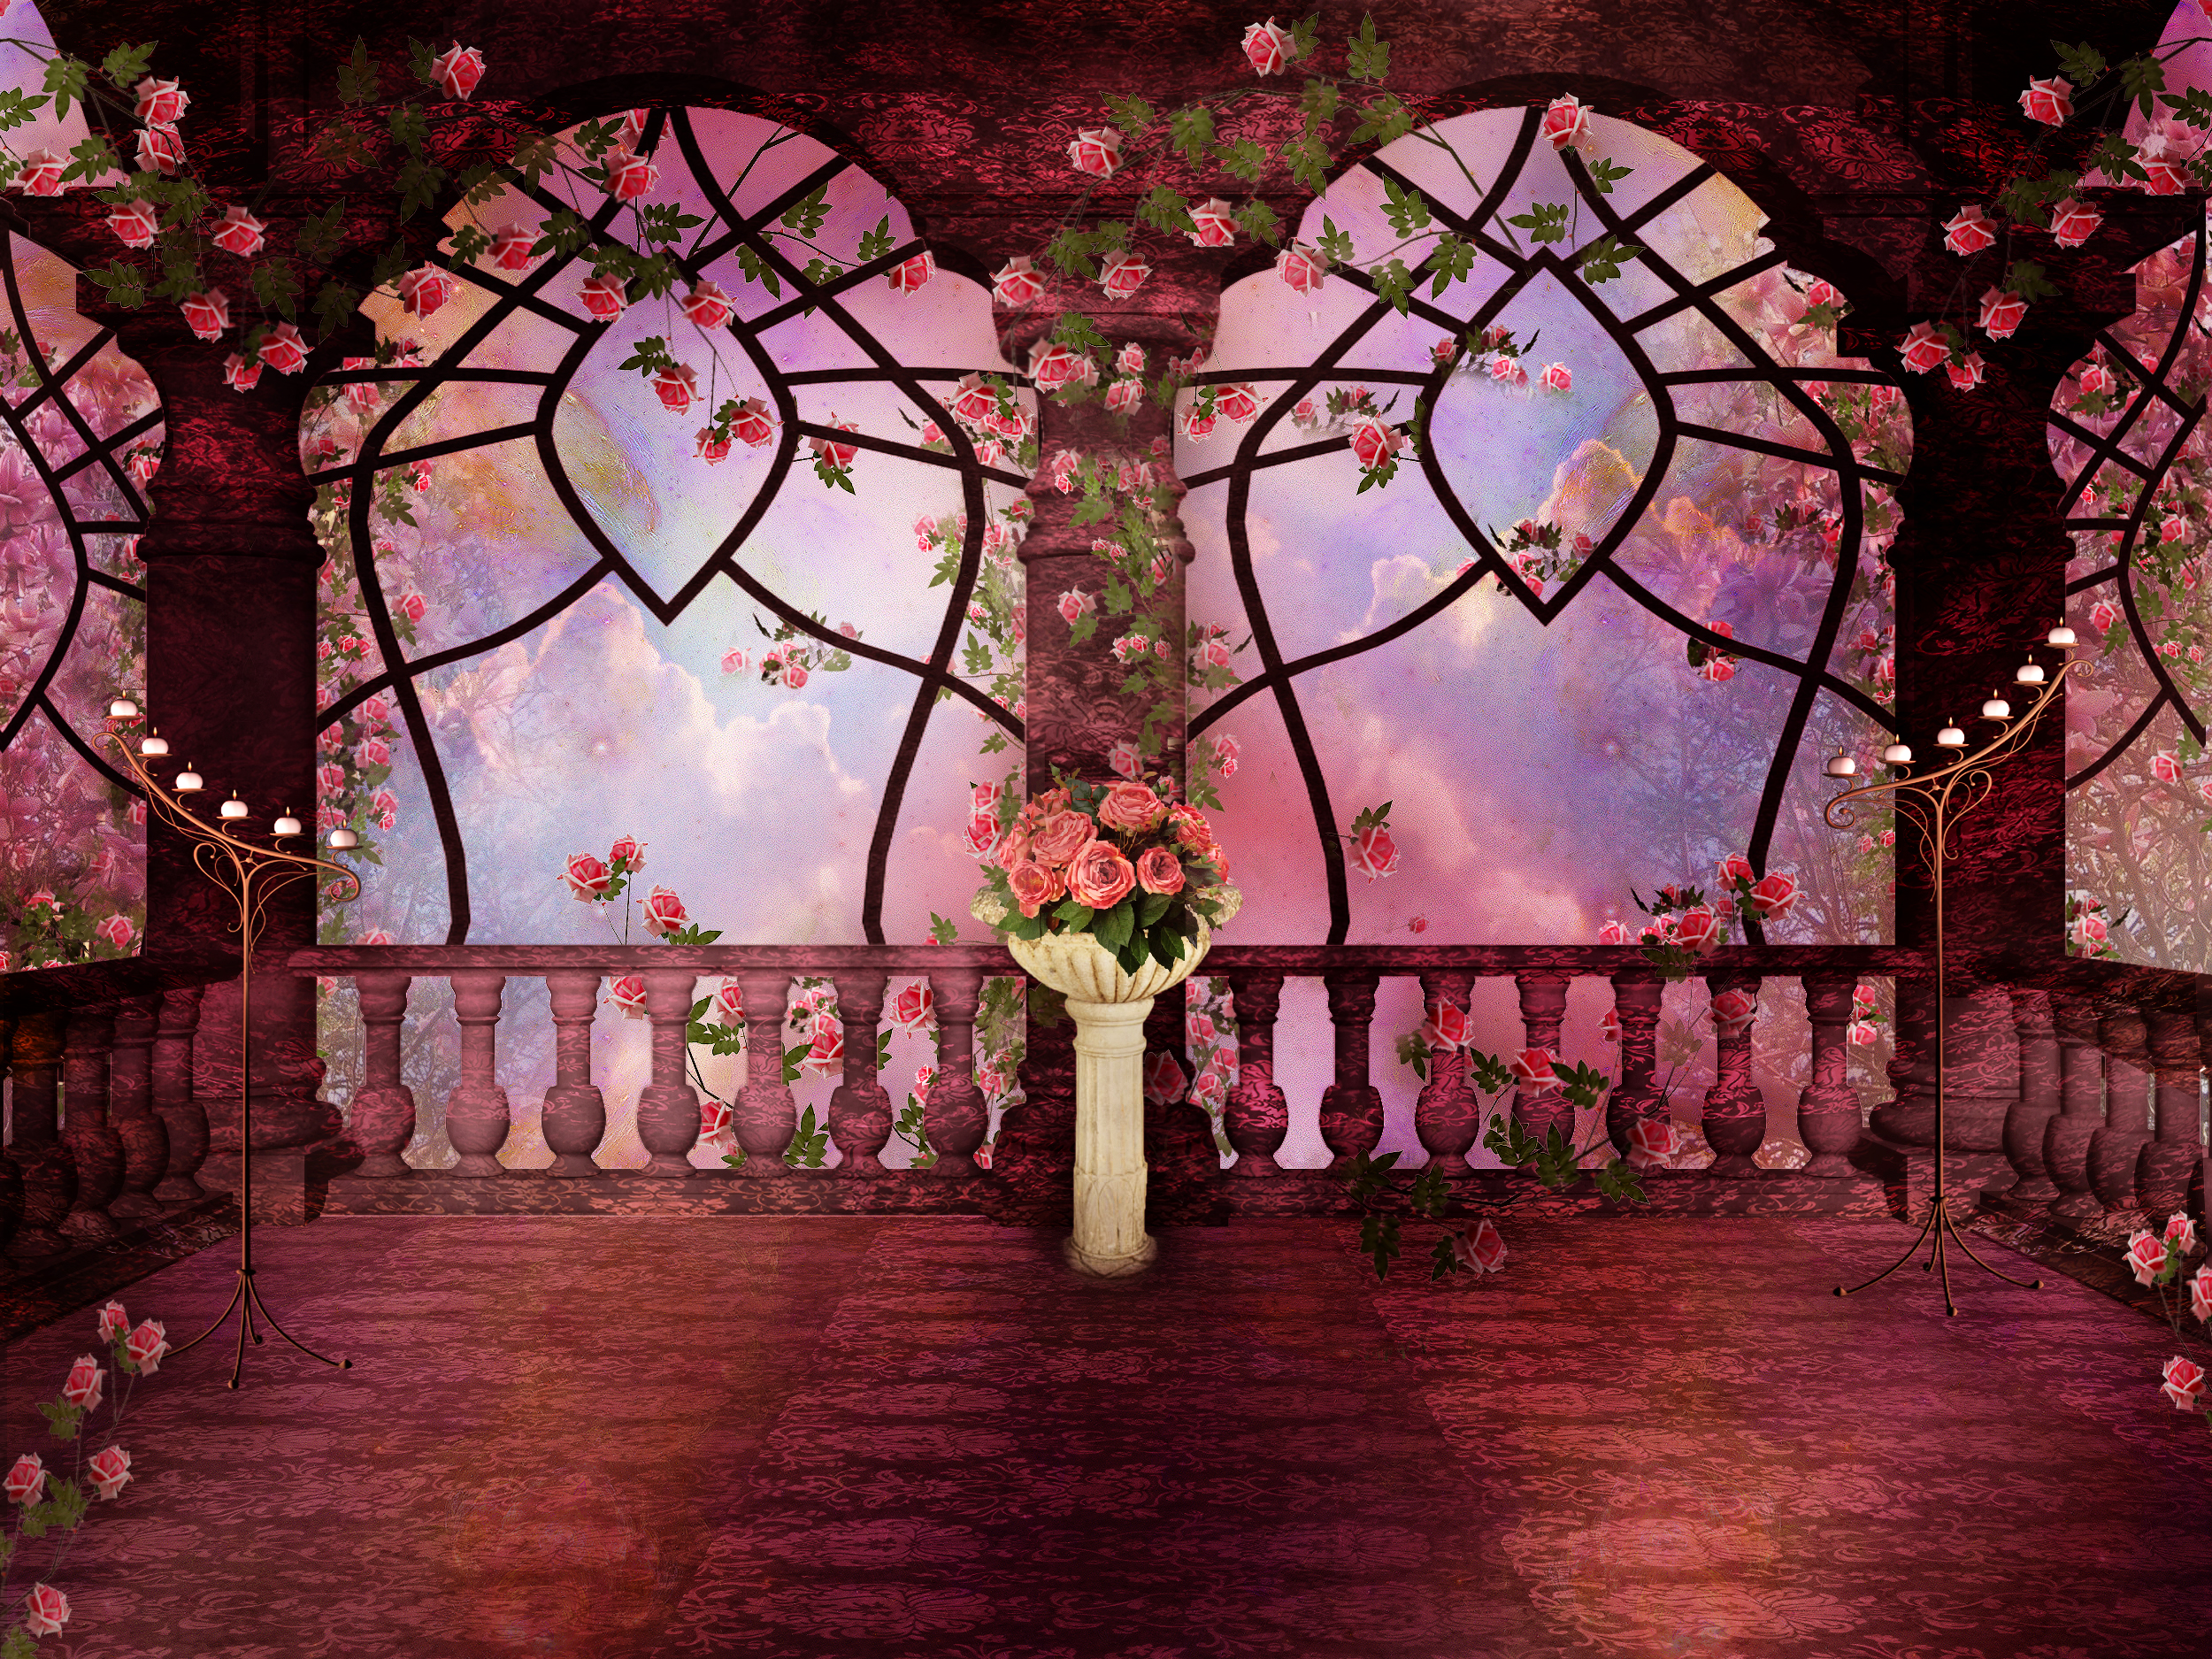 HD wallpaper artistic, rose, arch, candle, columns, fantasy, gothic, pink rose